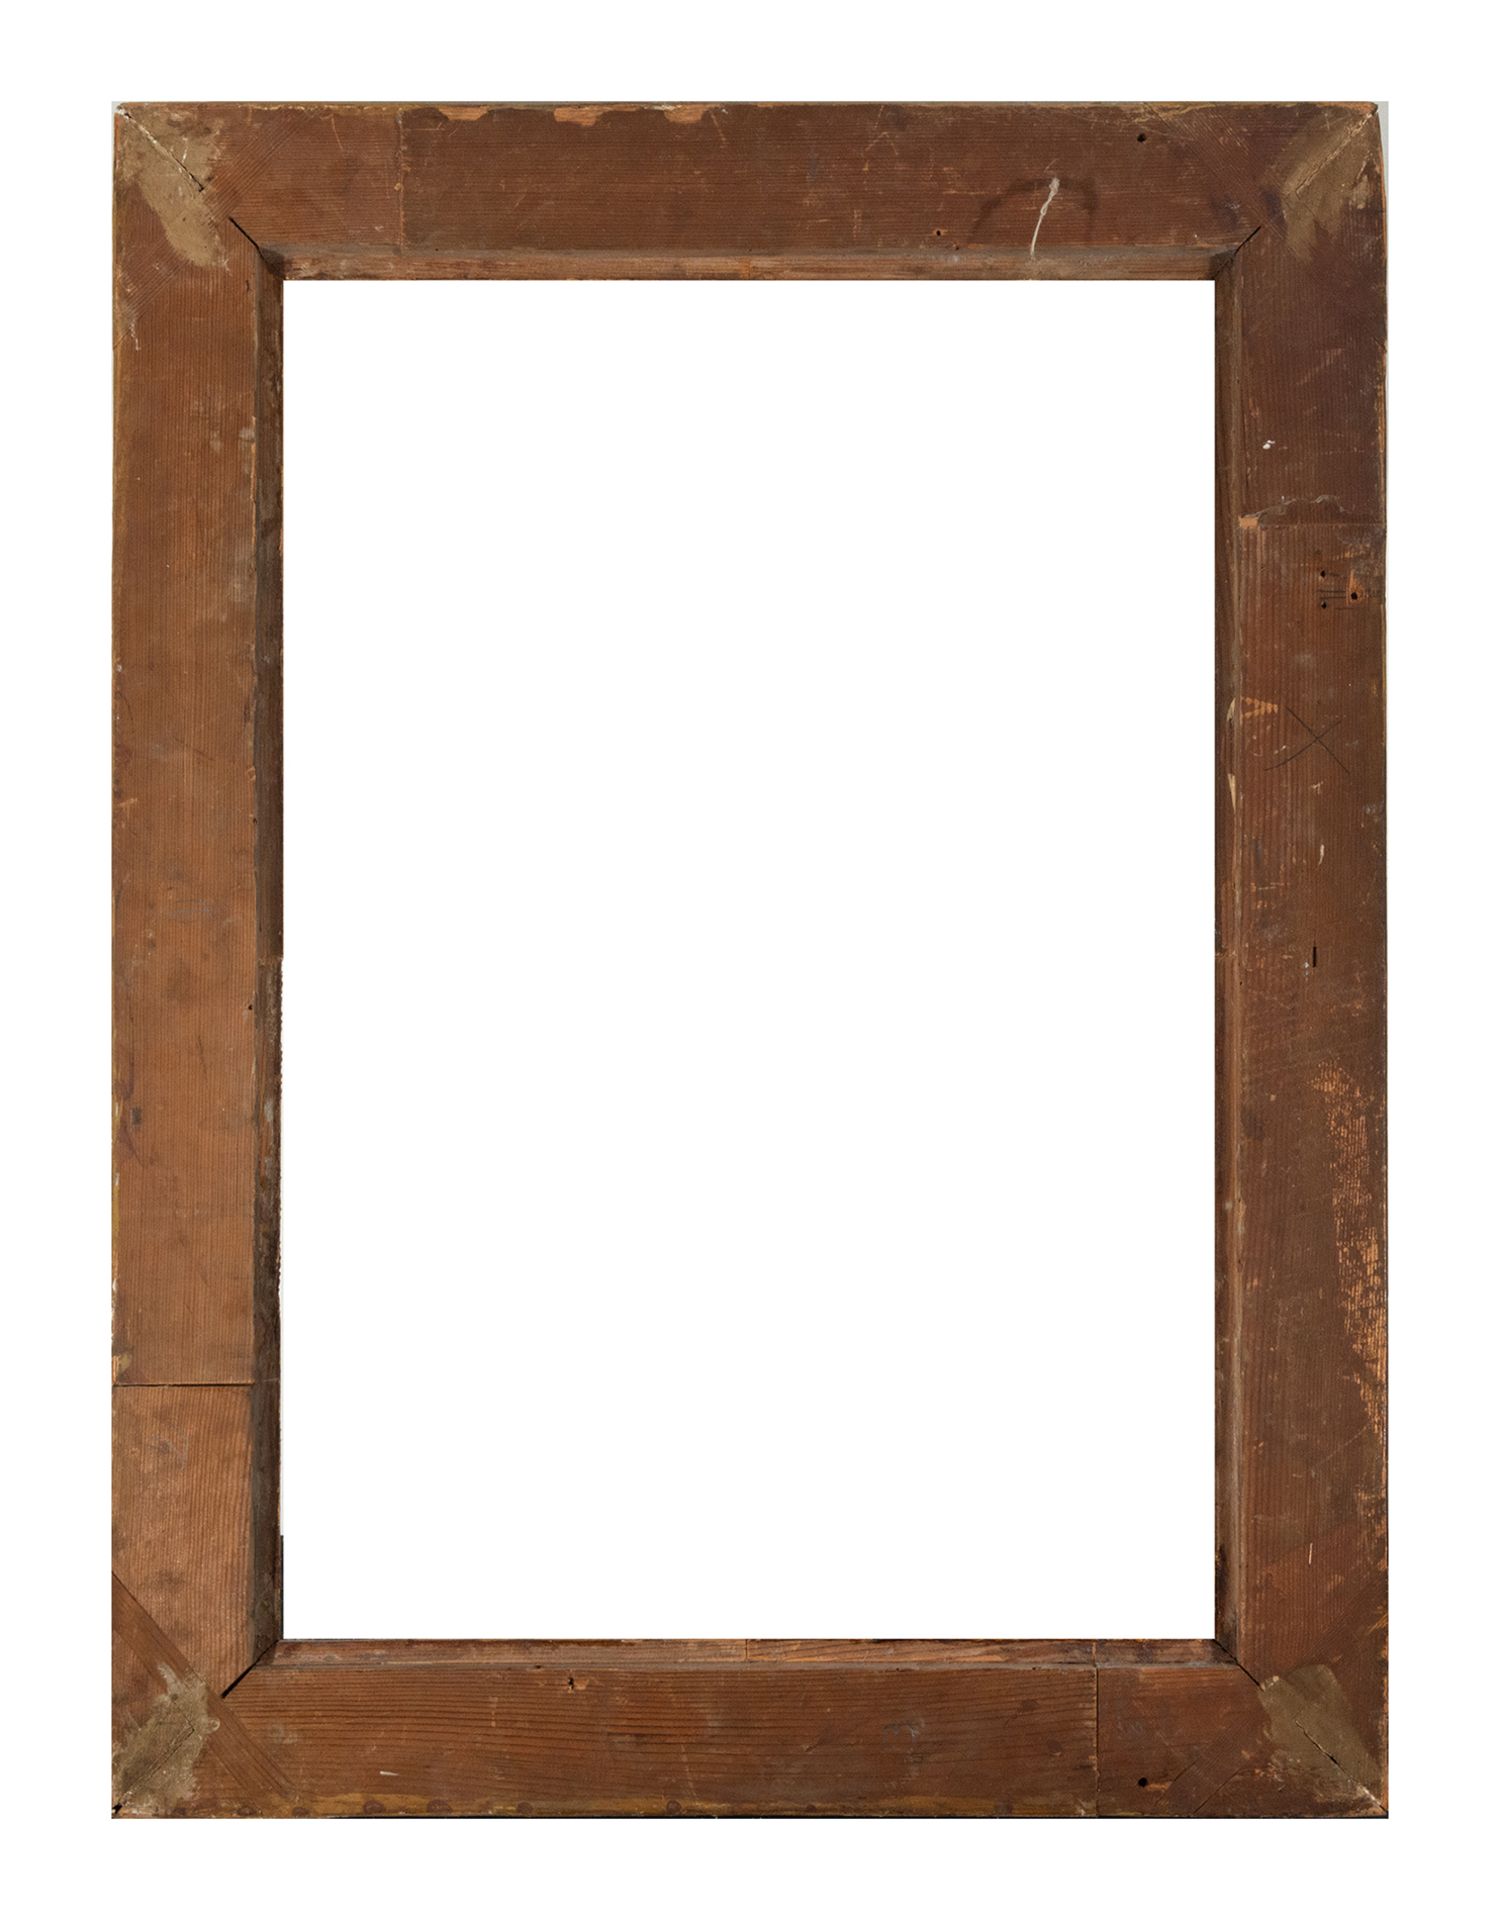 Neoclassical frame, 19th century - Image 2 of 2